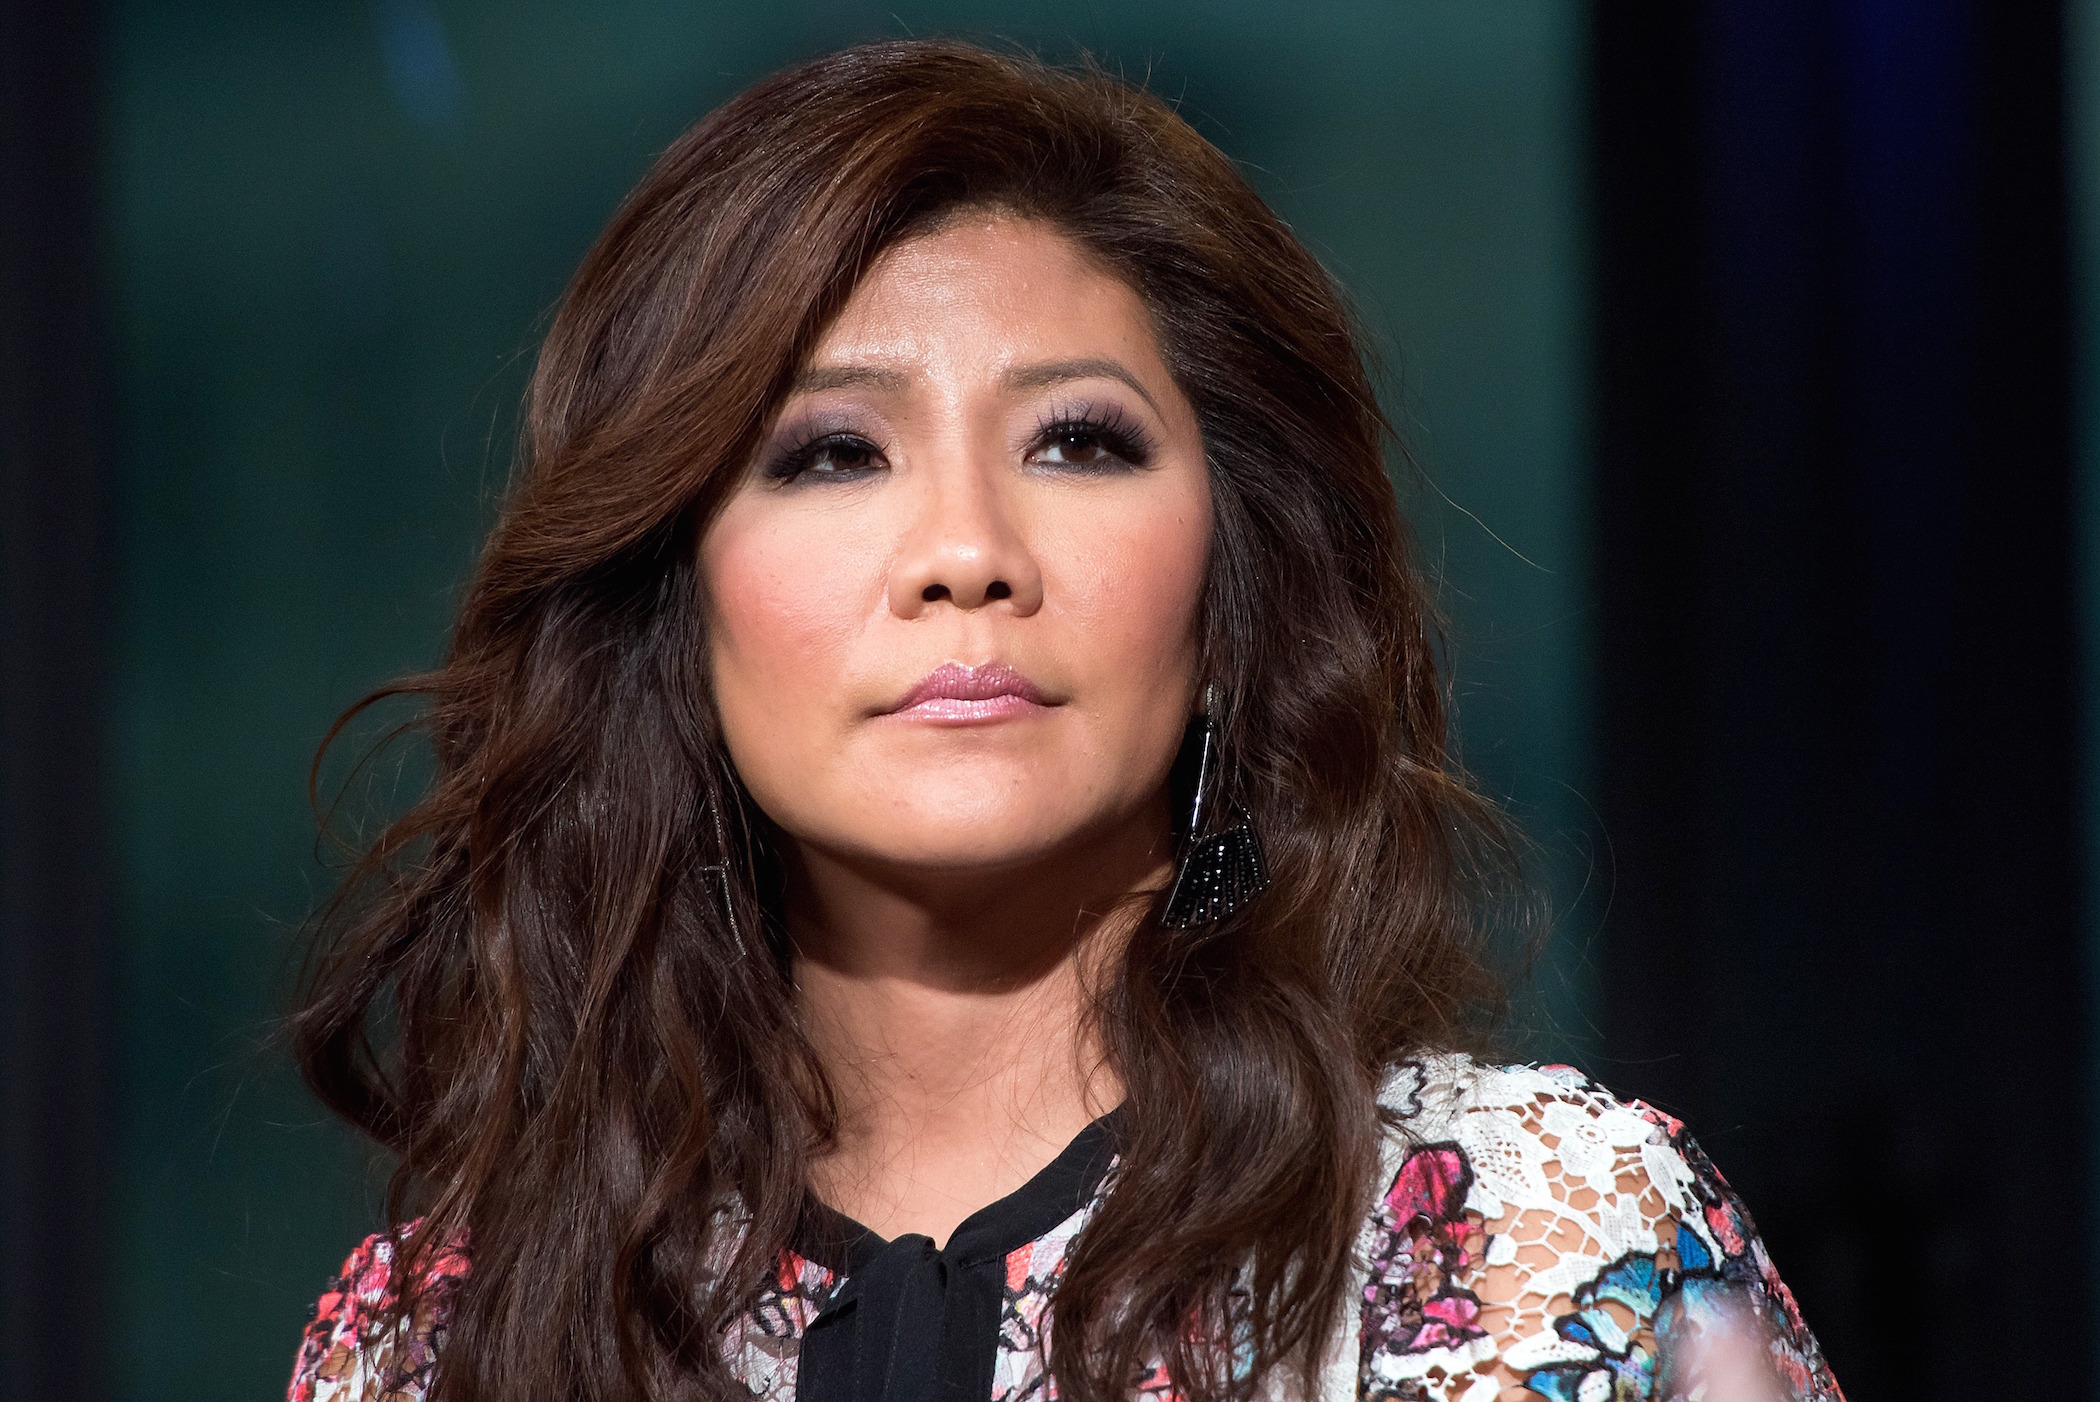 Julie Chen attends the AOL Build Speaker Series to discuss "The Talk" at AOL HQ on September 6, 2016 in New York City.  (Photo by Mike Pont/WireImage)